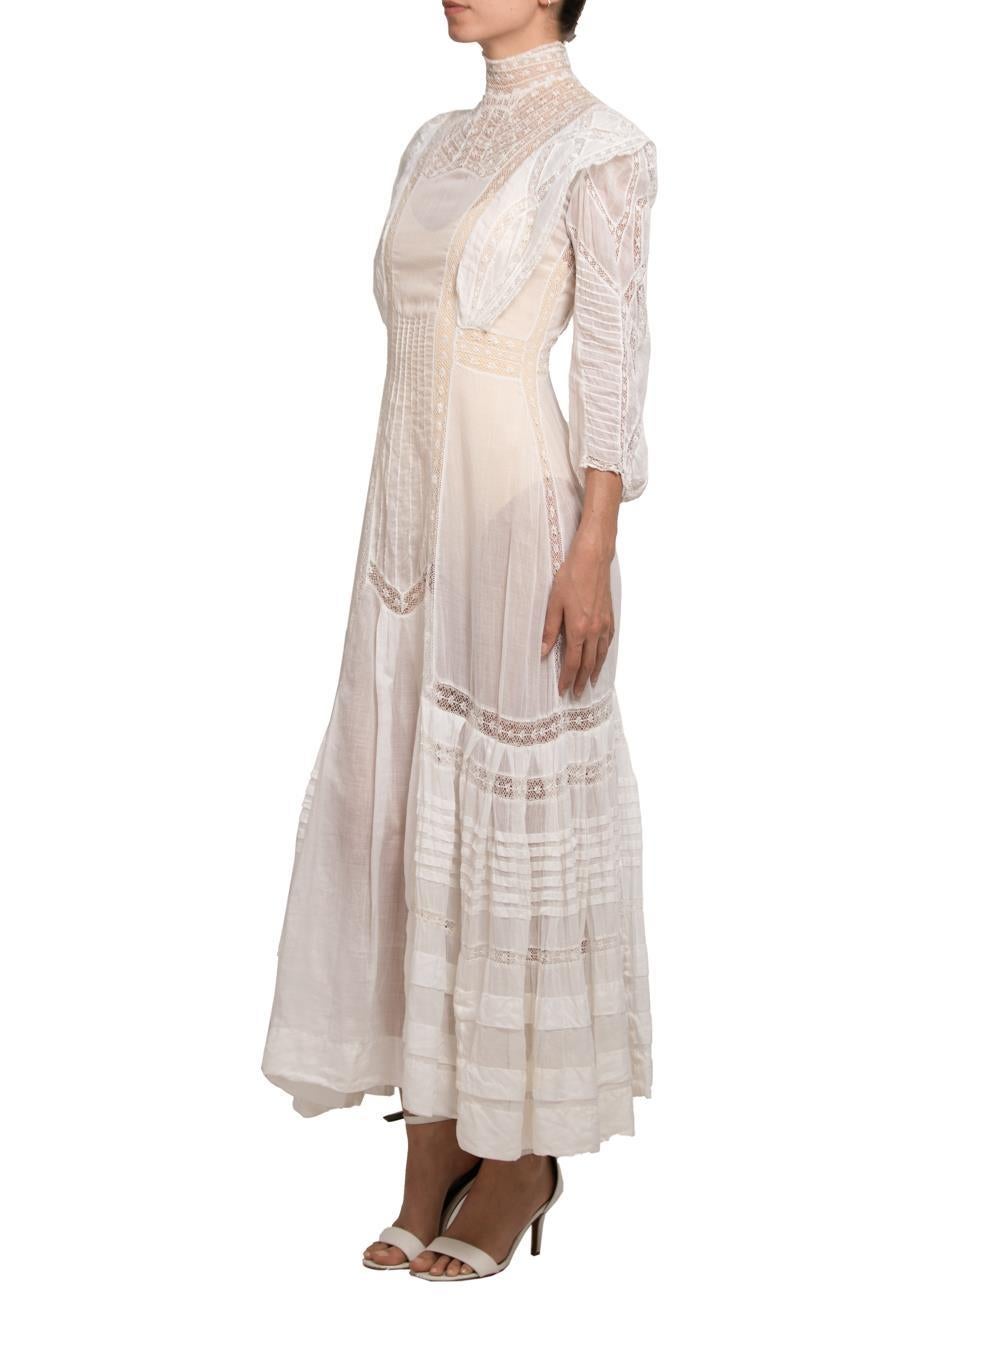 Victorian Cream Organic Cotton Voile & Lace Long Sleeved Dress For Sale 1